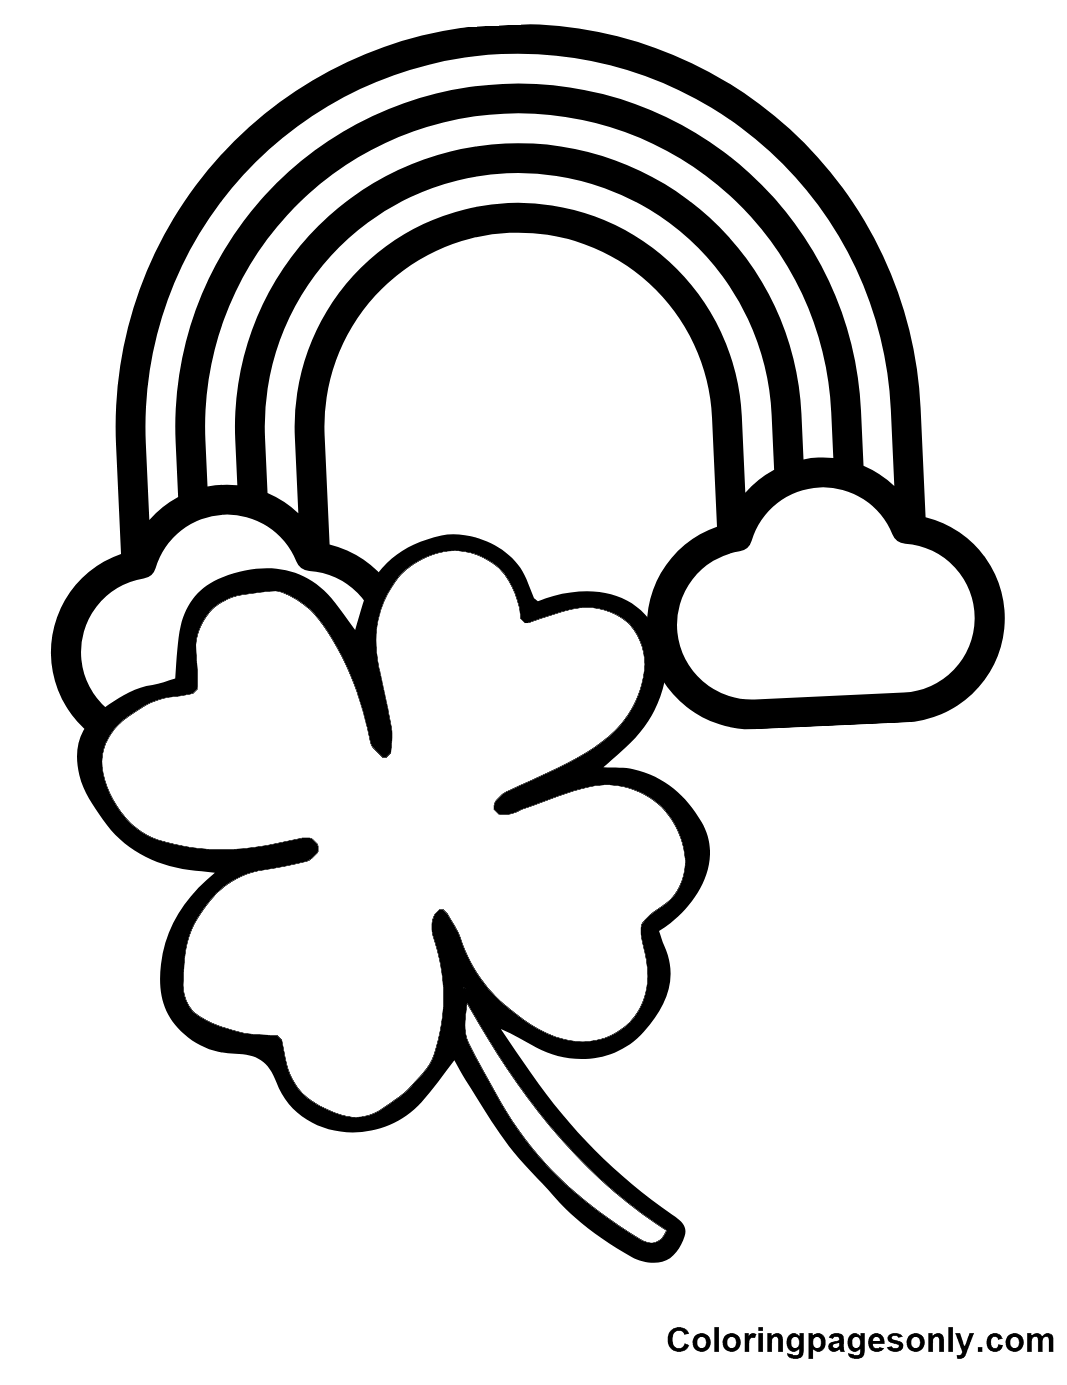 Shamrock coloring pages printable for free download